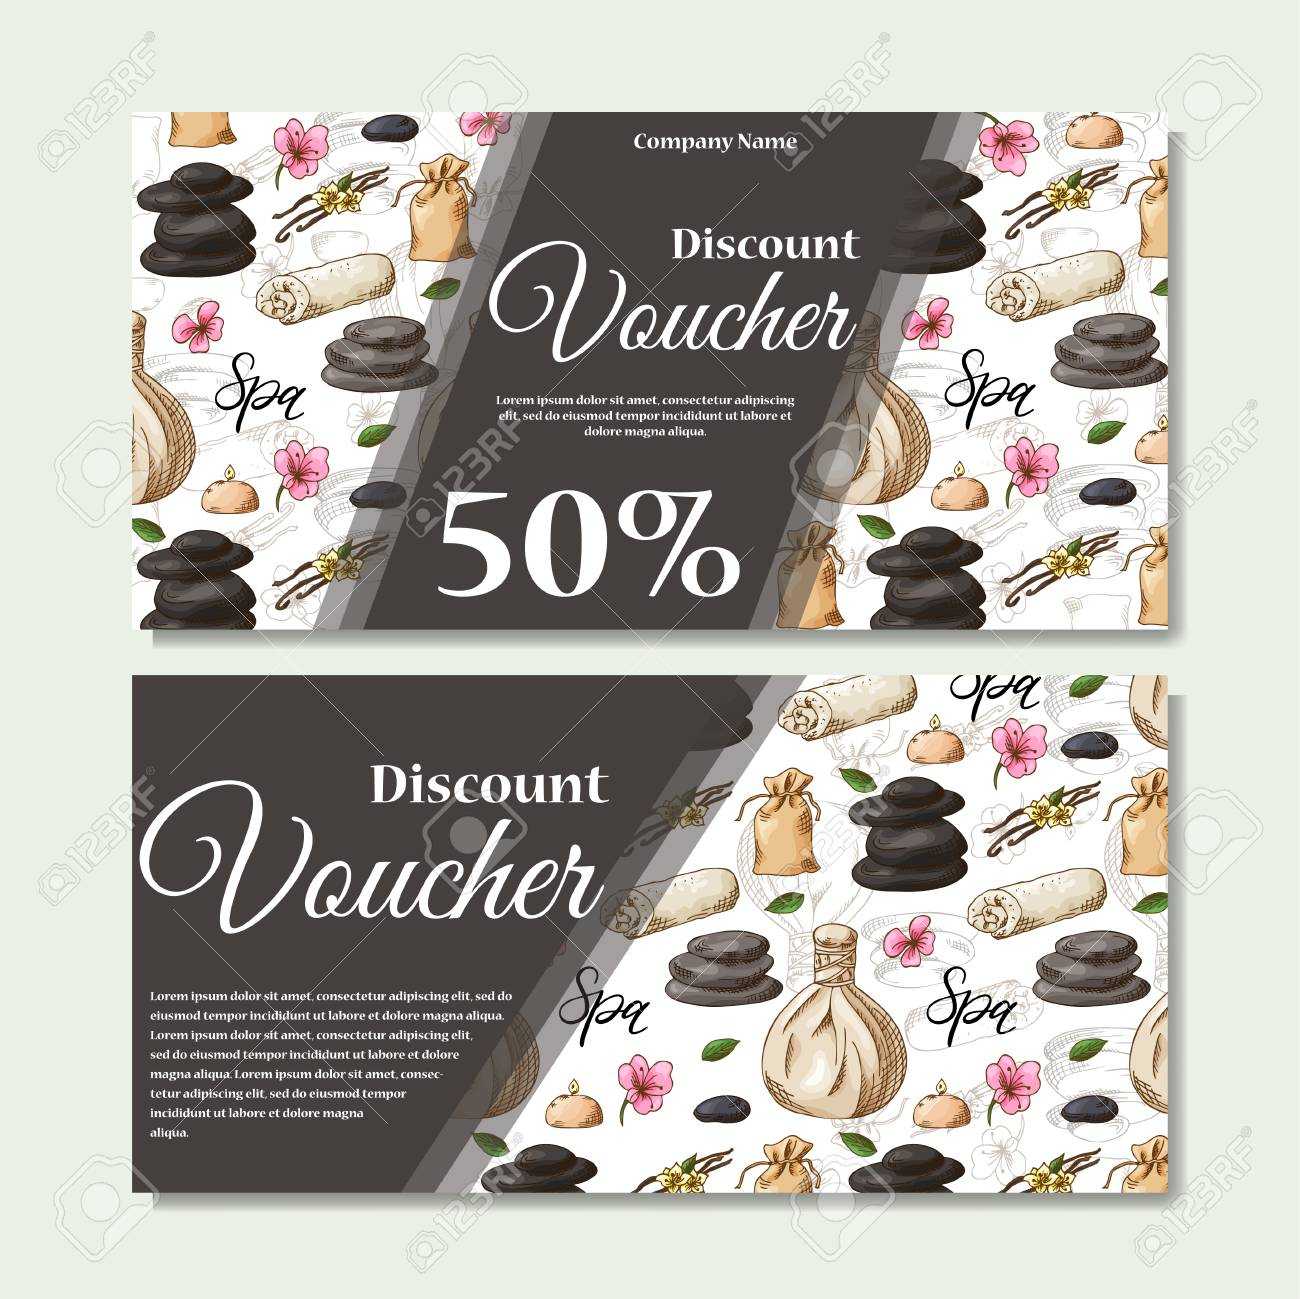 Gift Voucher Template With Spa Elements In Hand Drawn Style For Salon Gift Certificate Template